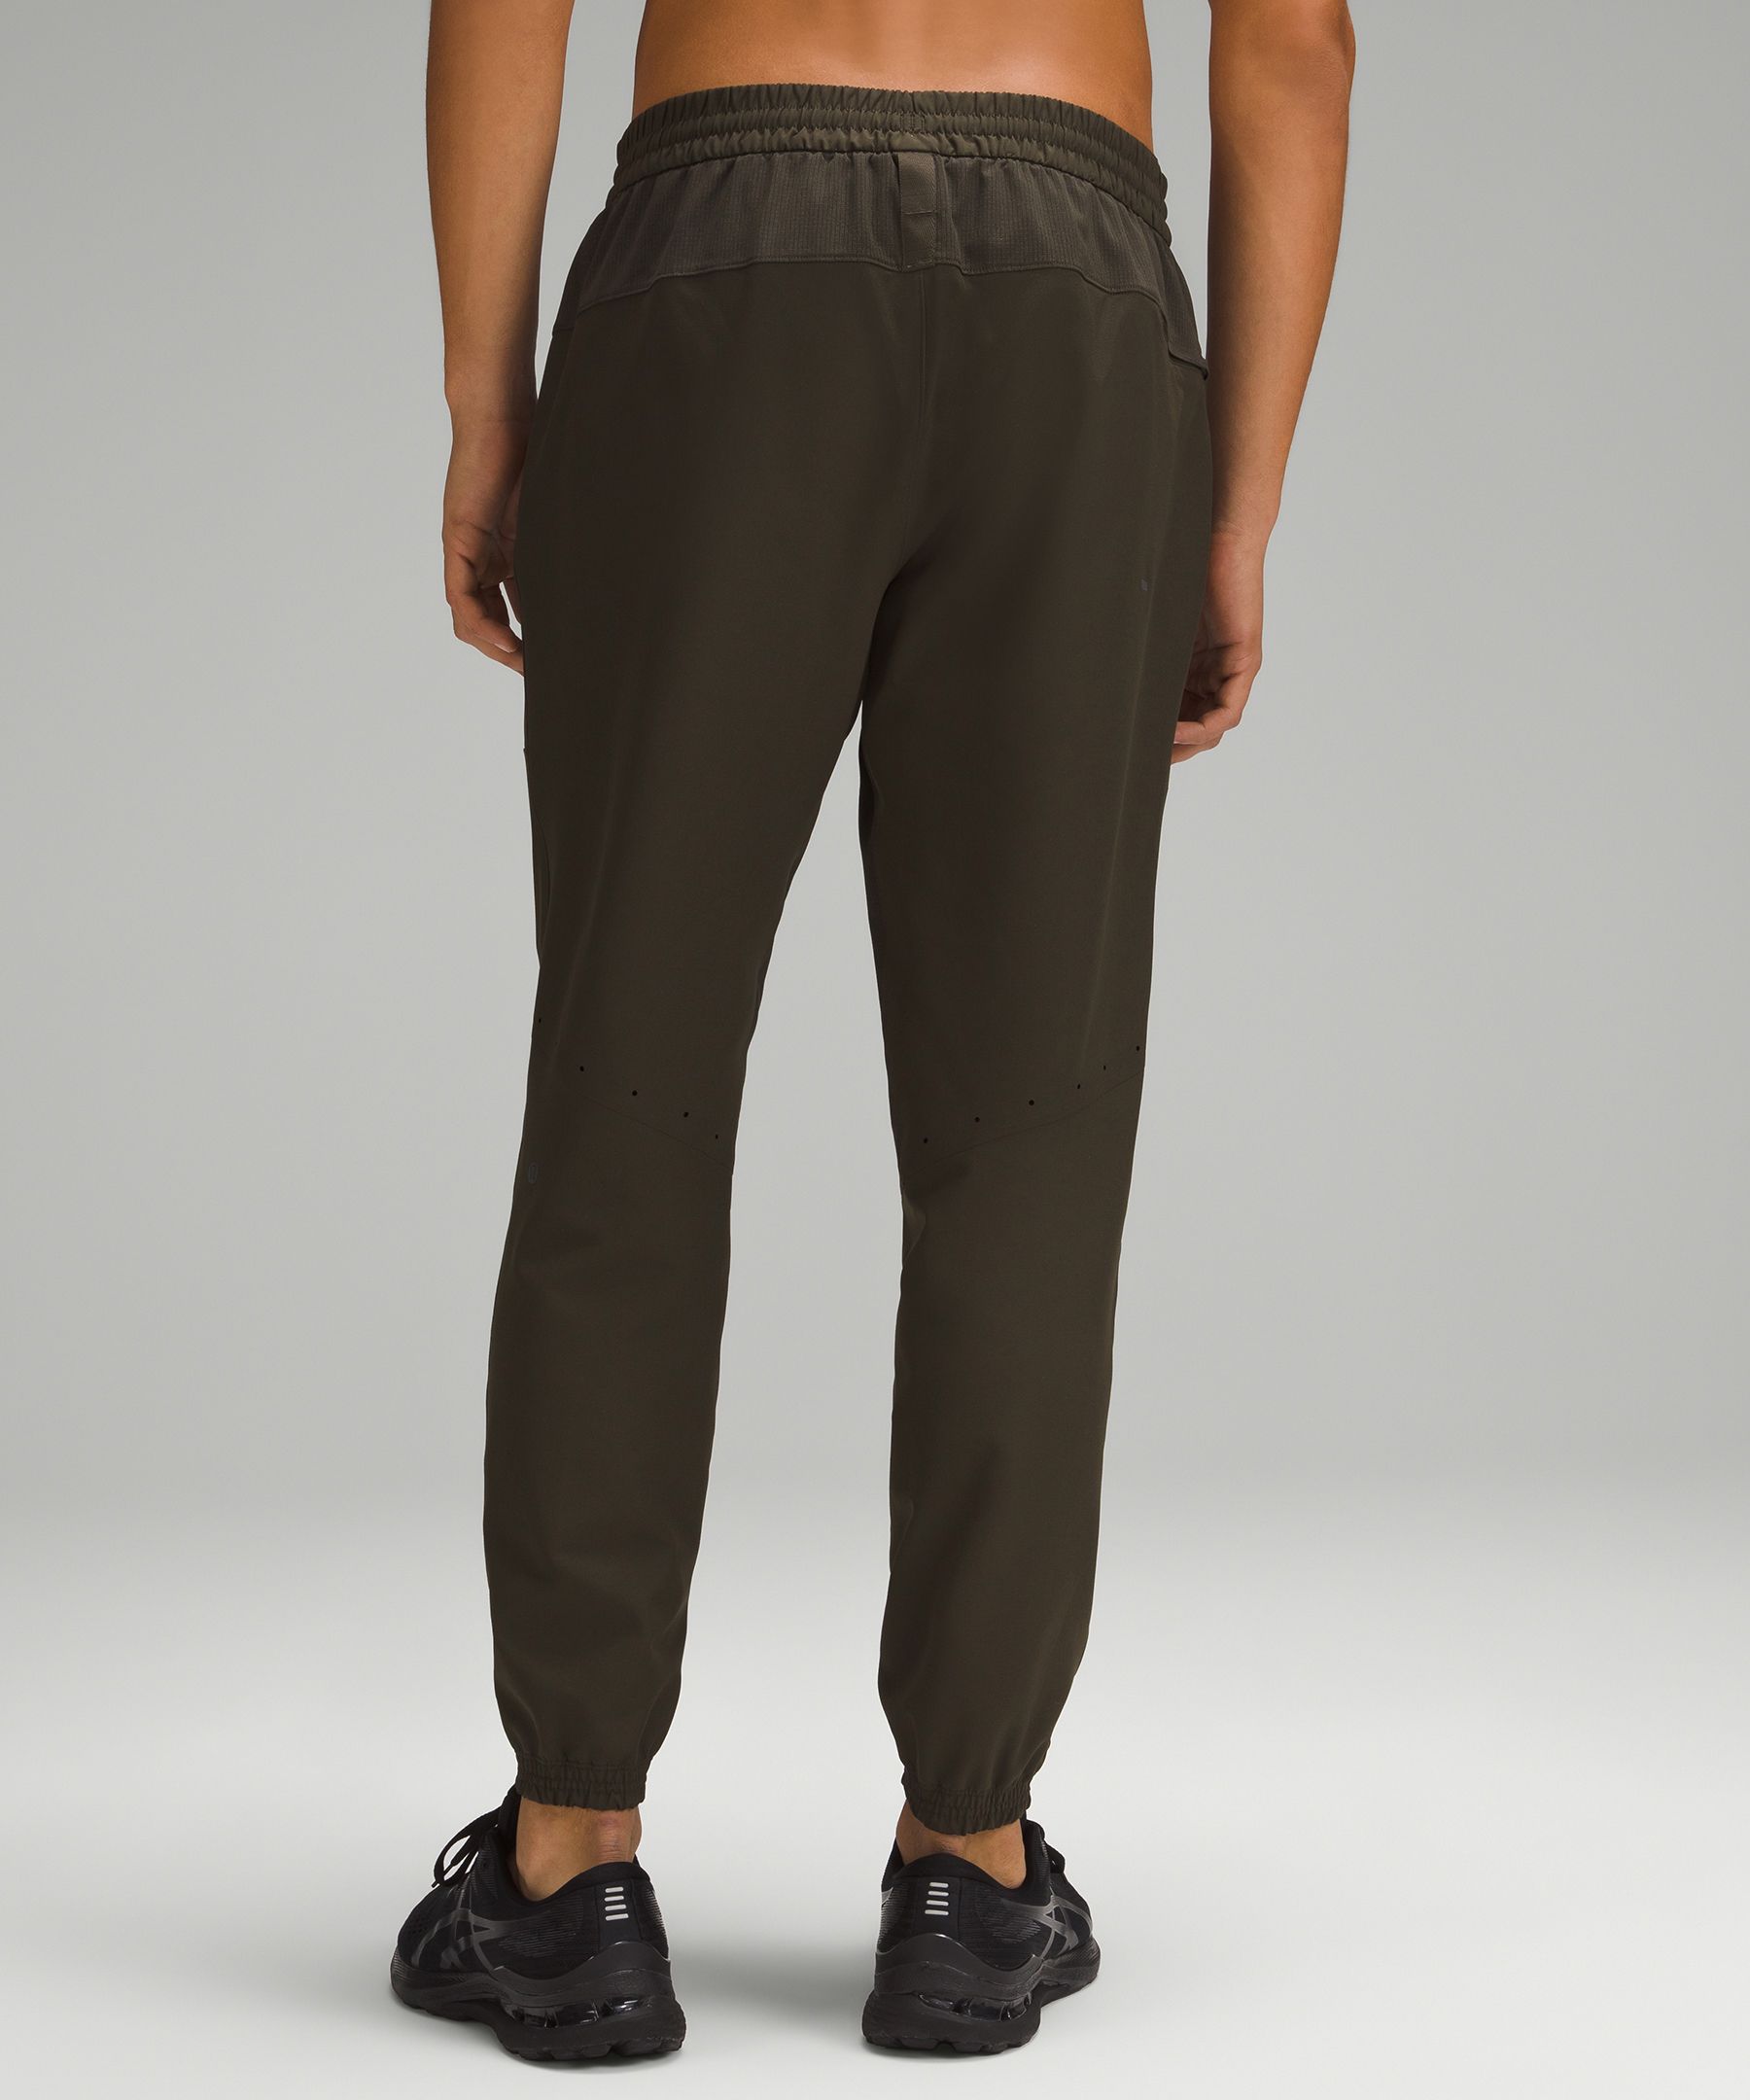 Why Our Tall Athletic Joggers Are Better Than Lululemon